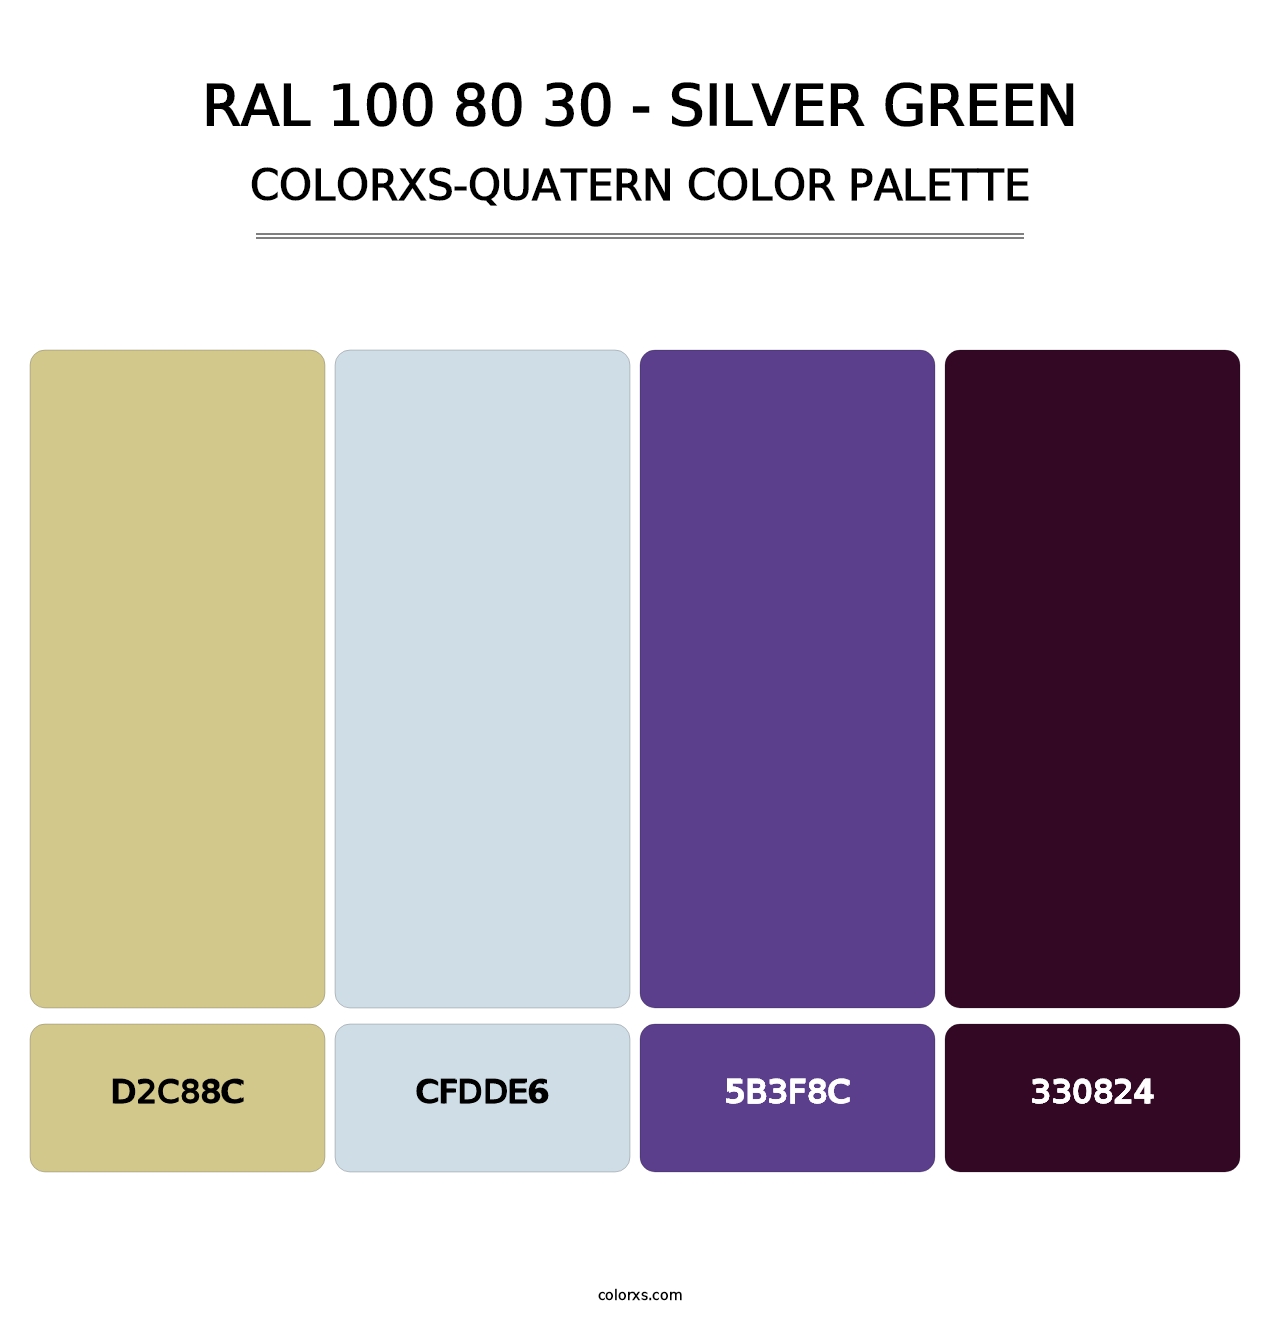 RAL 100 80 30 - Silver Green - Colorxs Quatern Palette